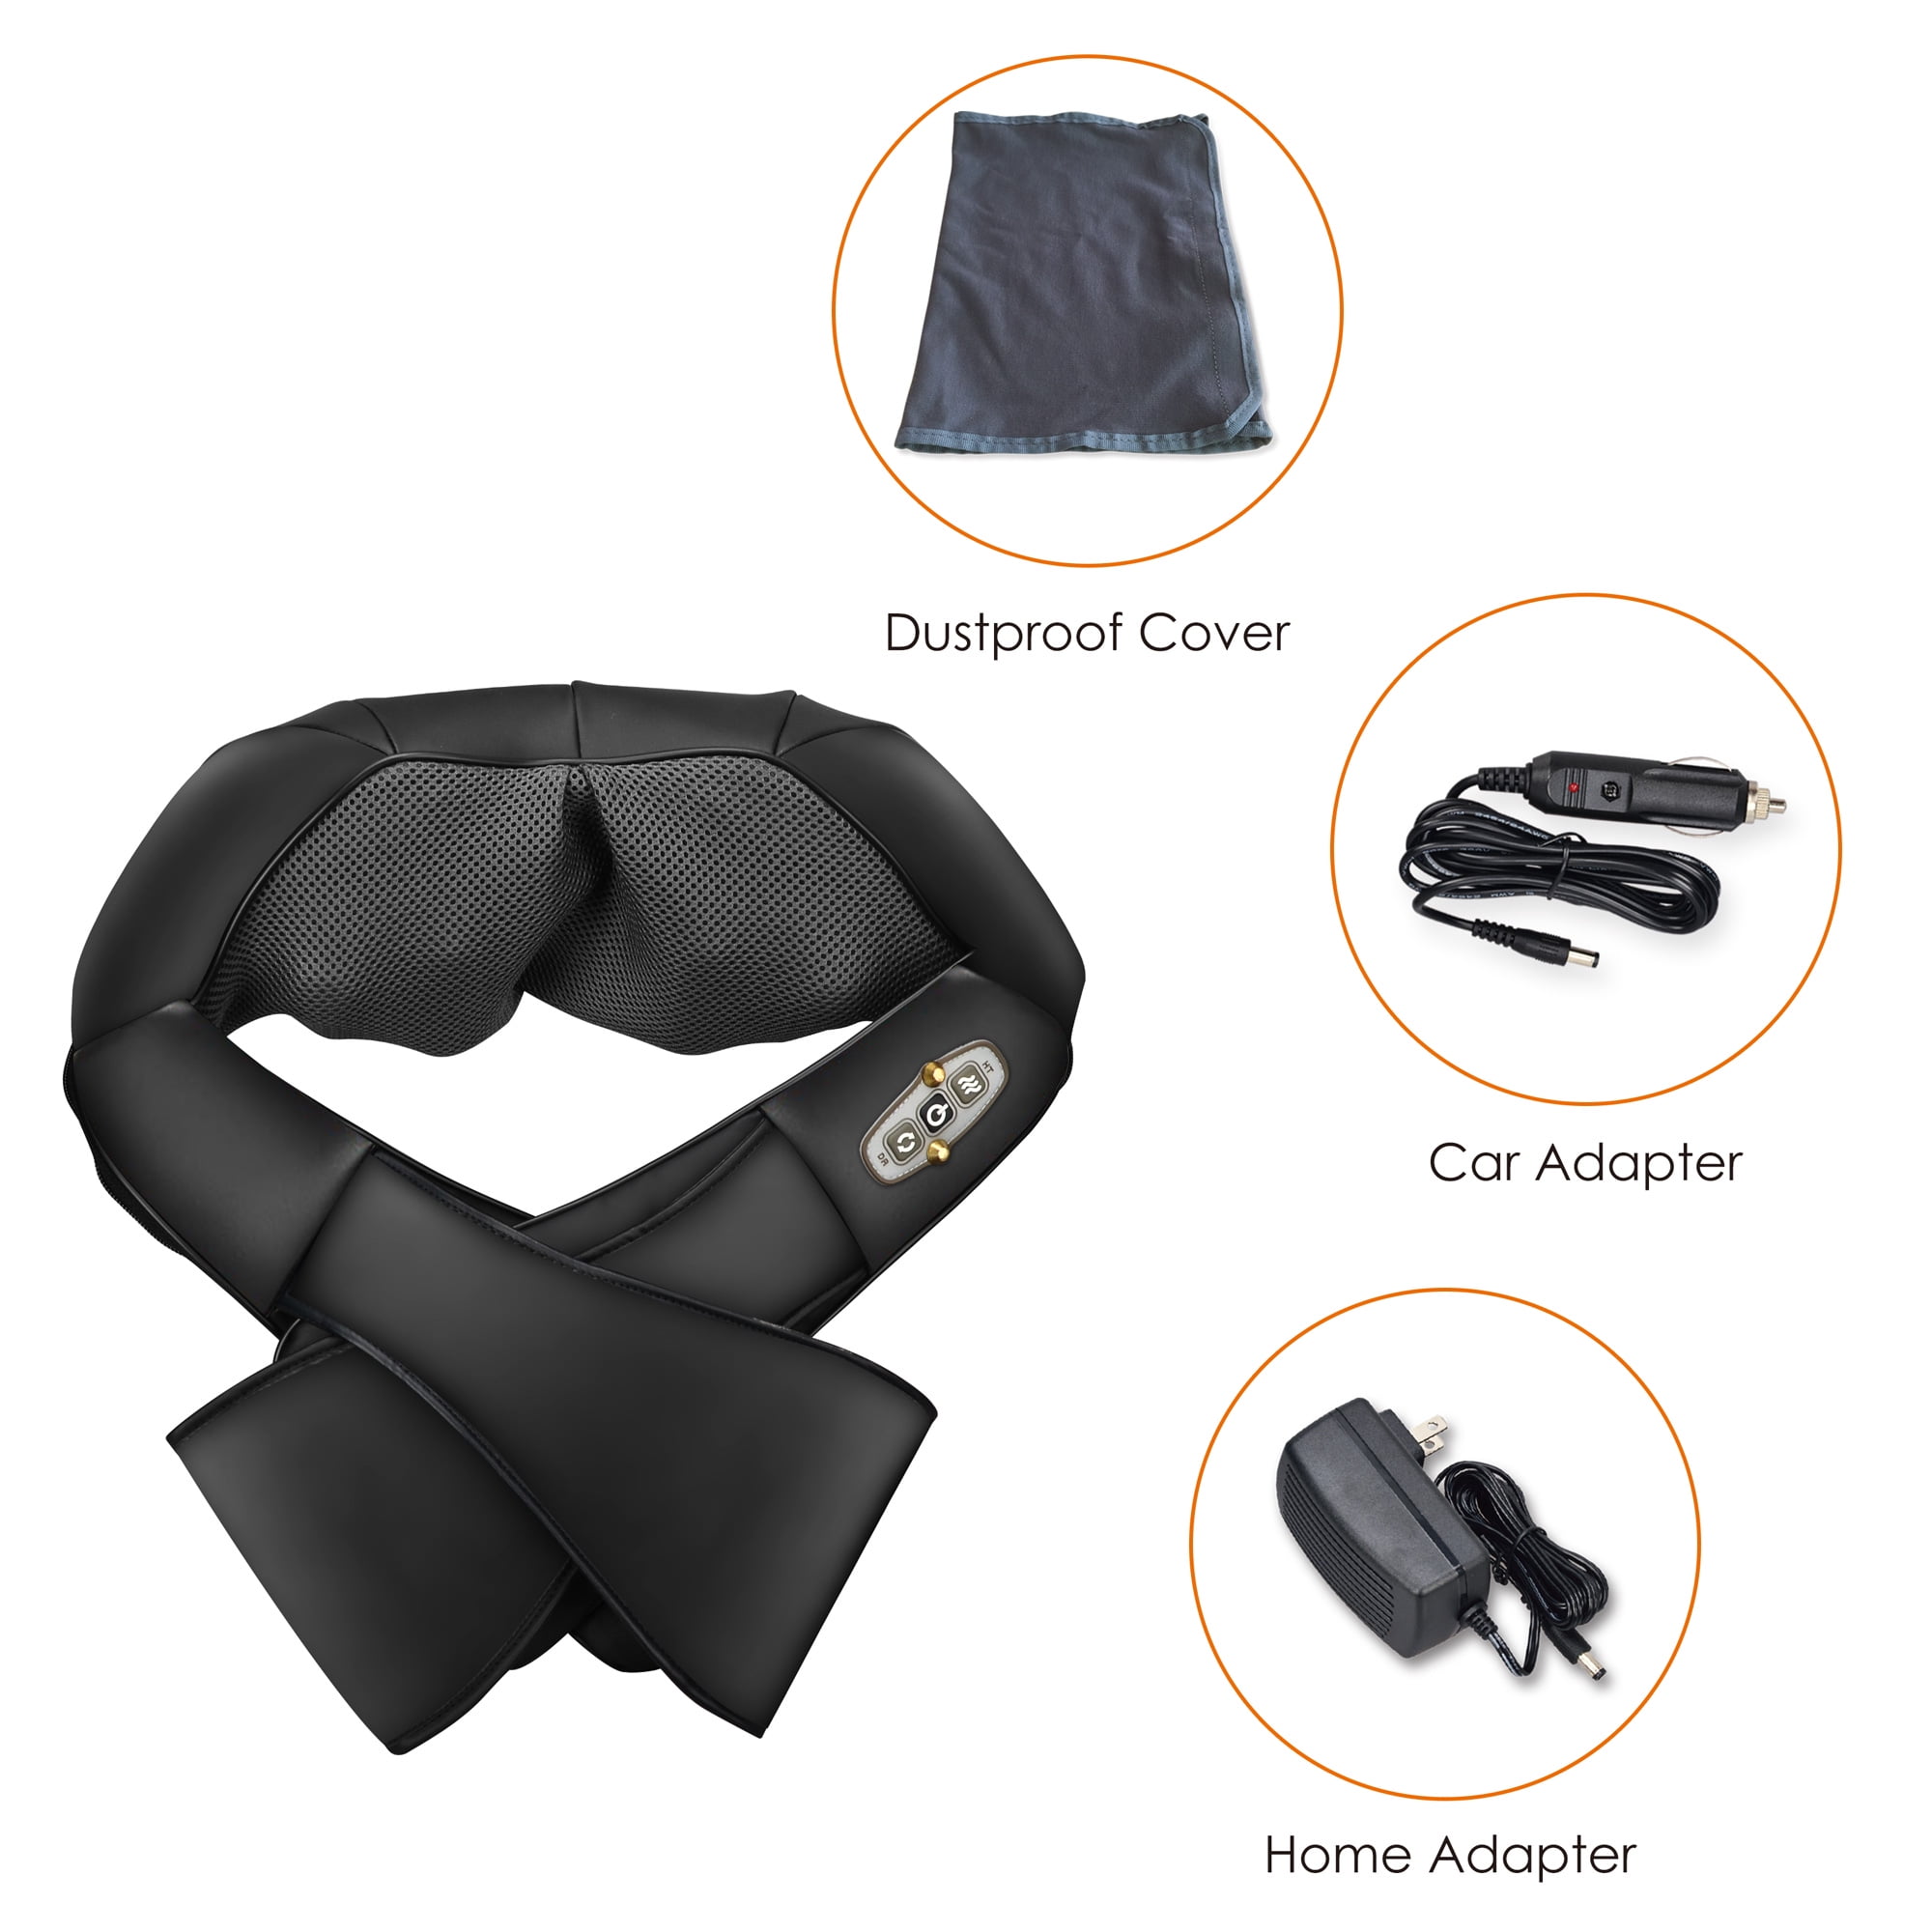 Comfier 4D Shiatsu Neck and Shoulder Massager for Neck Relax with heat